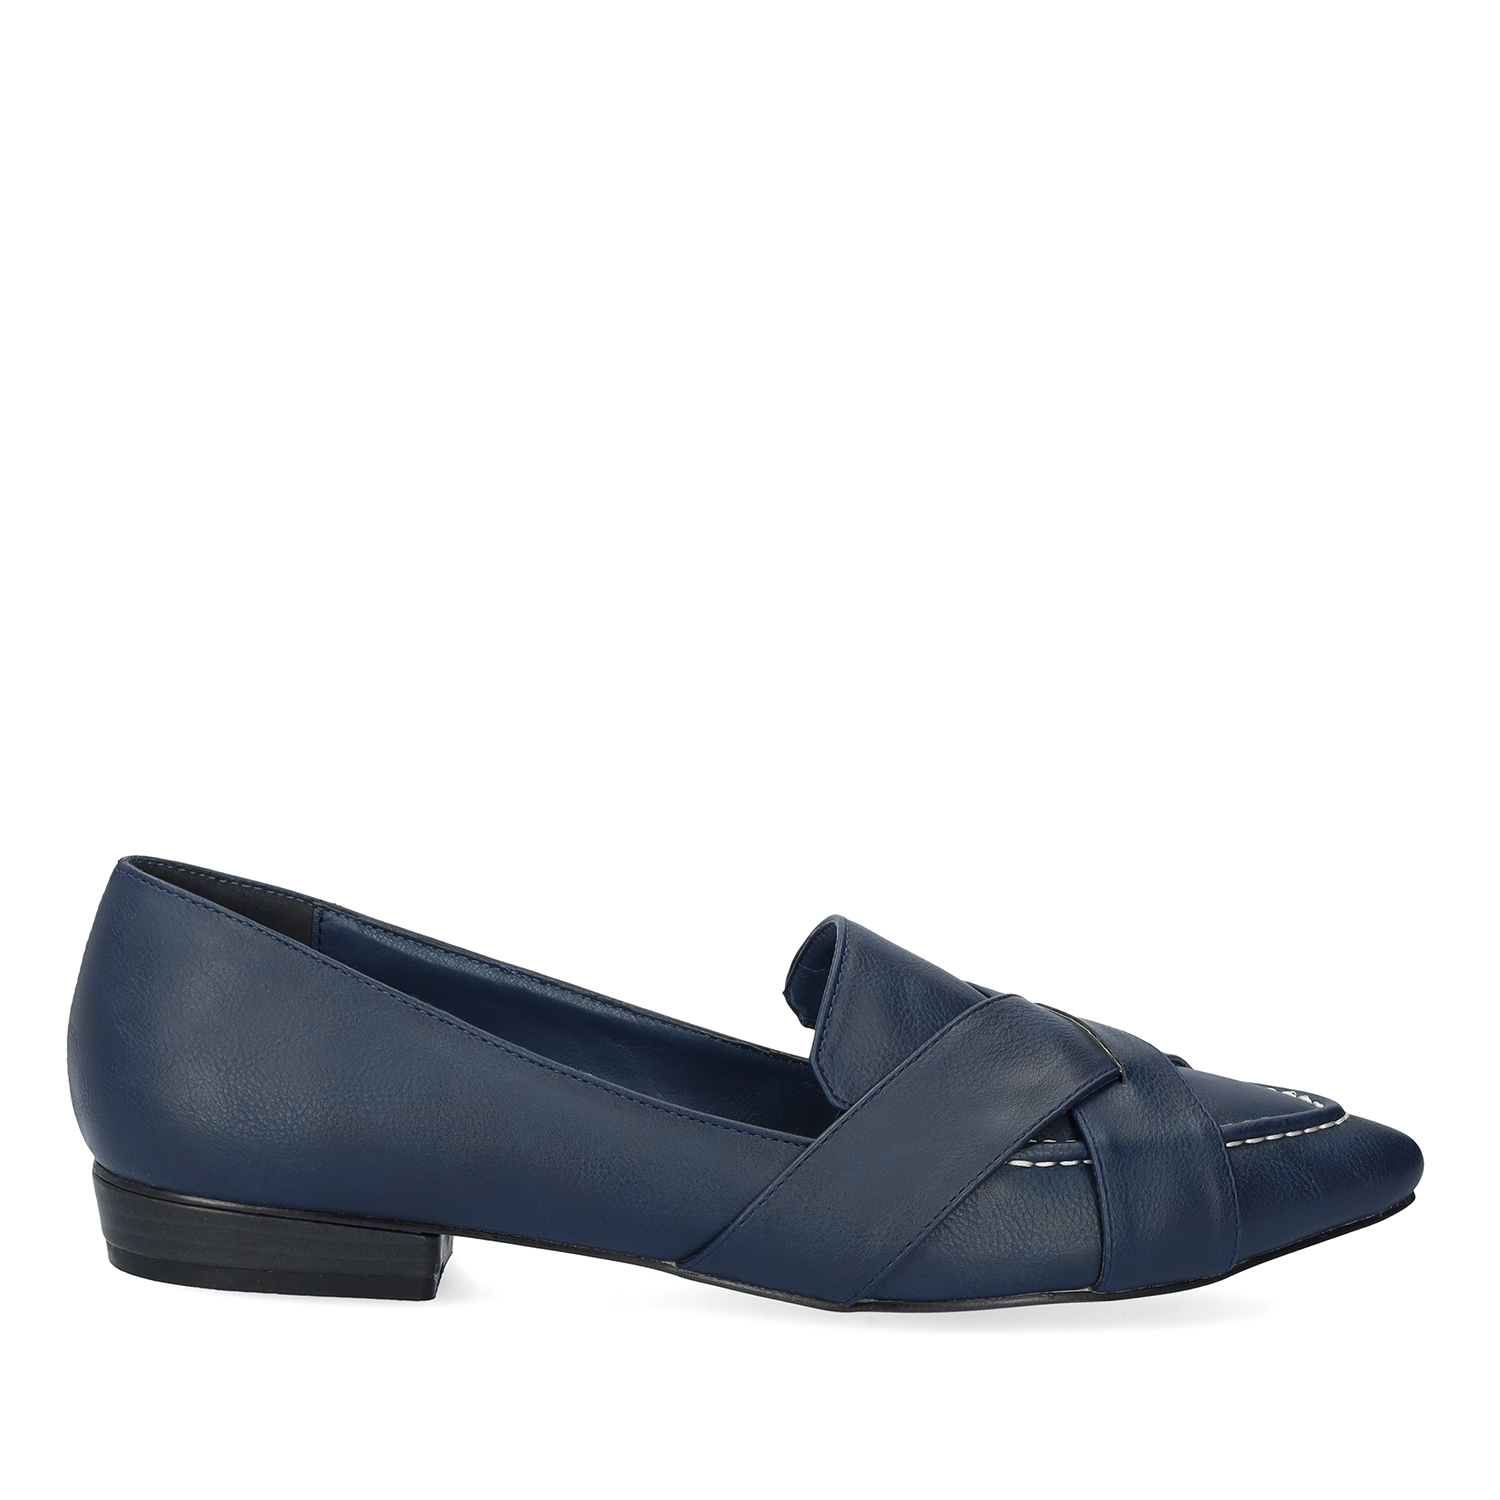 Pointed toe loafers in navy faux leather 